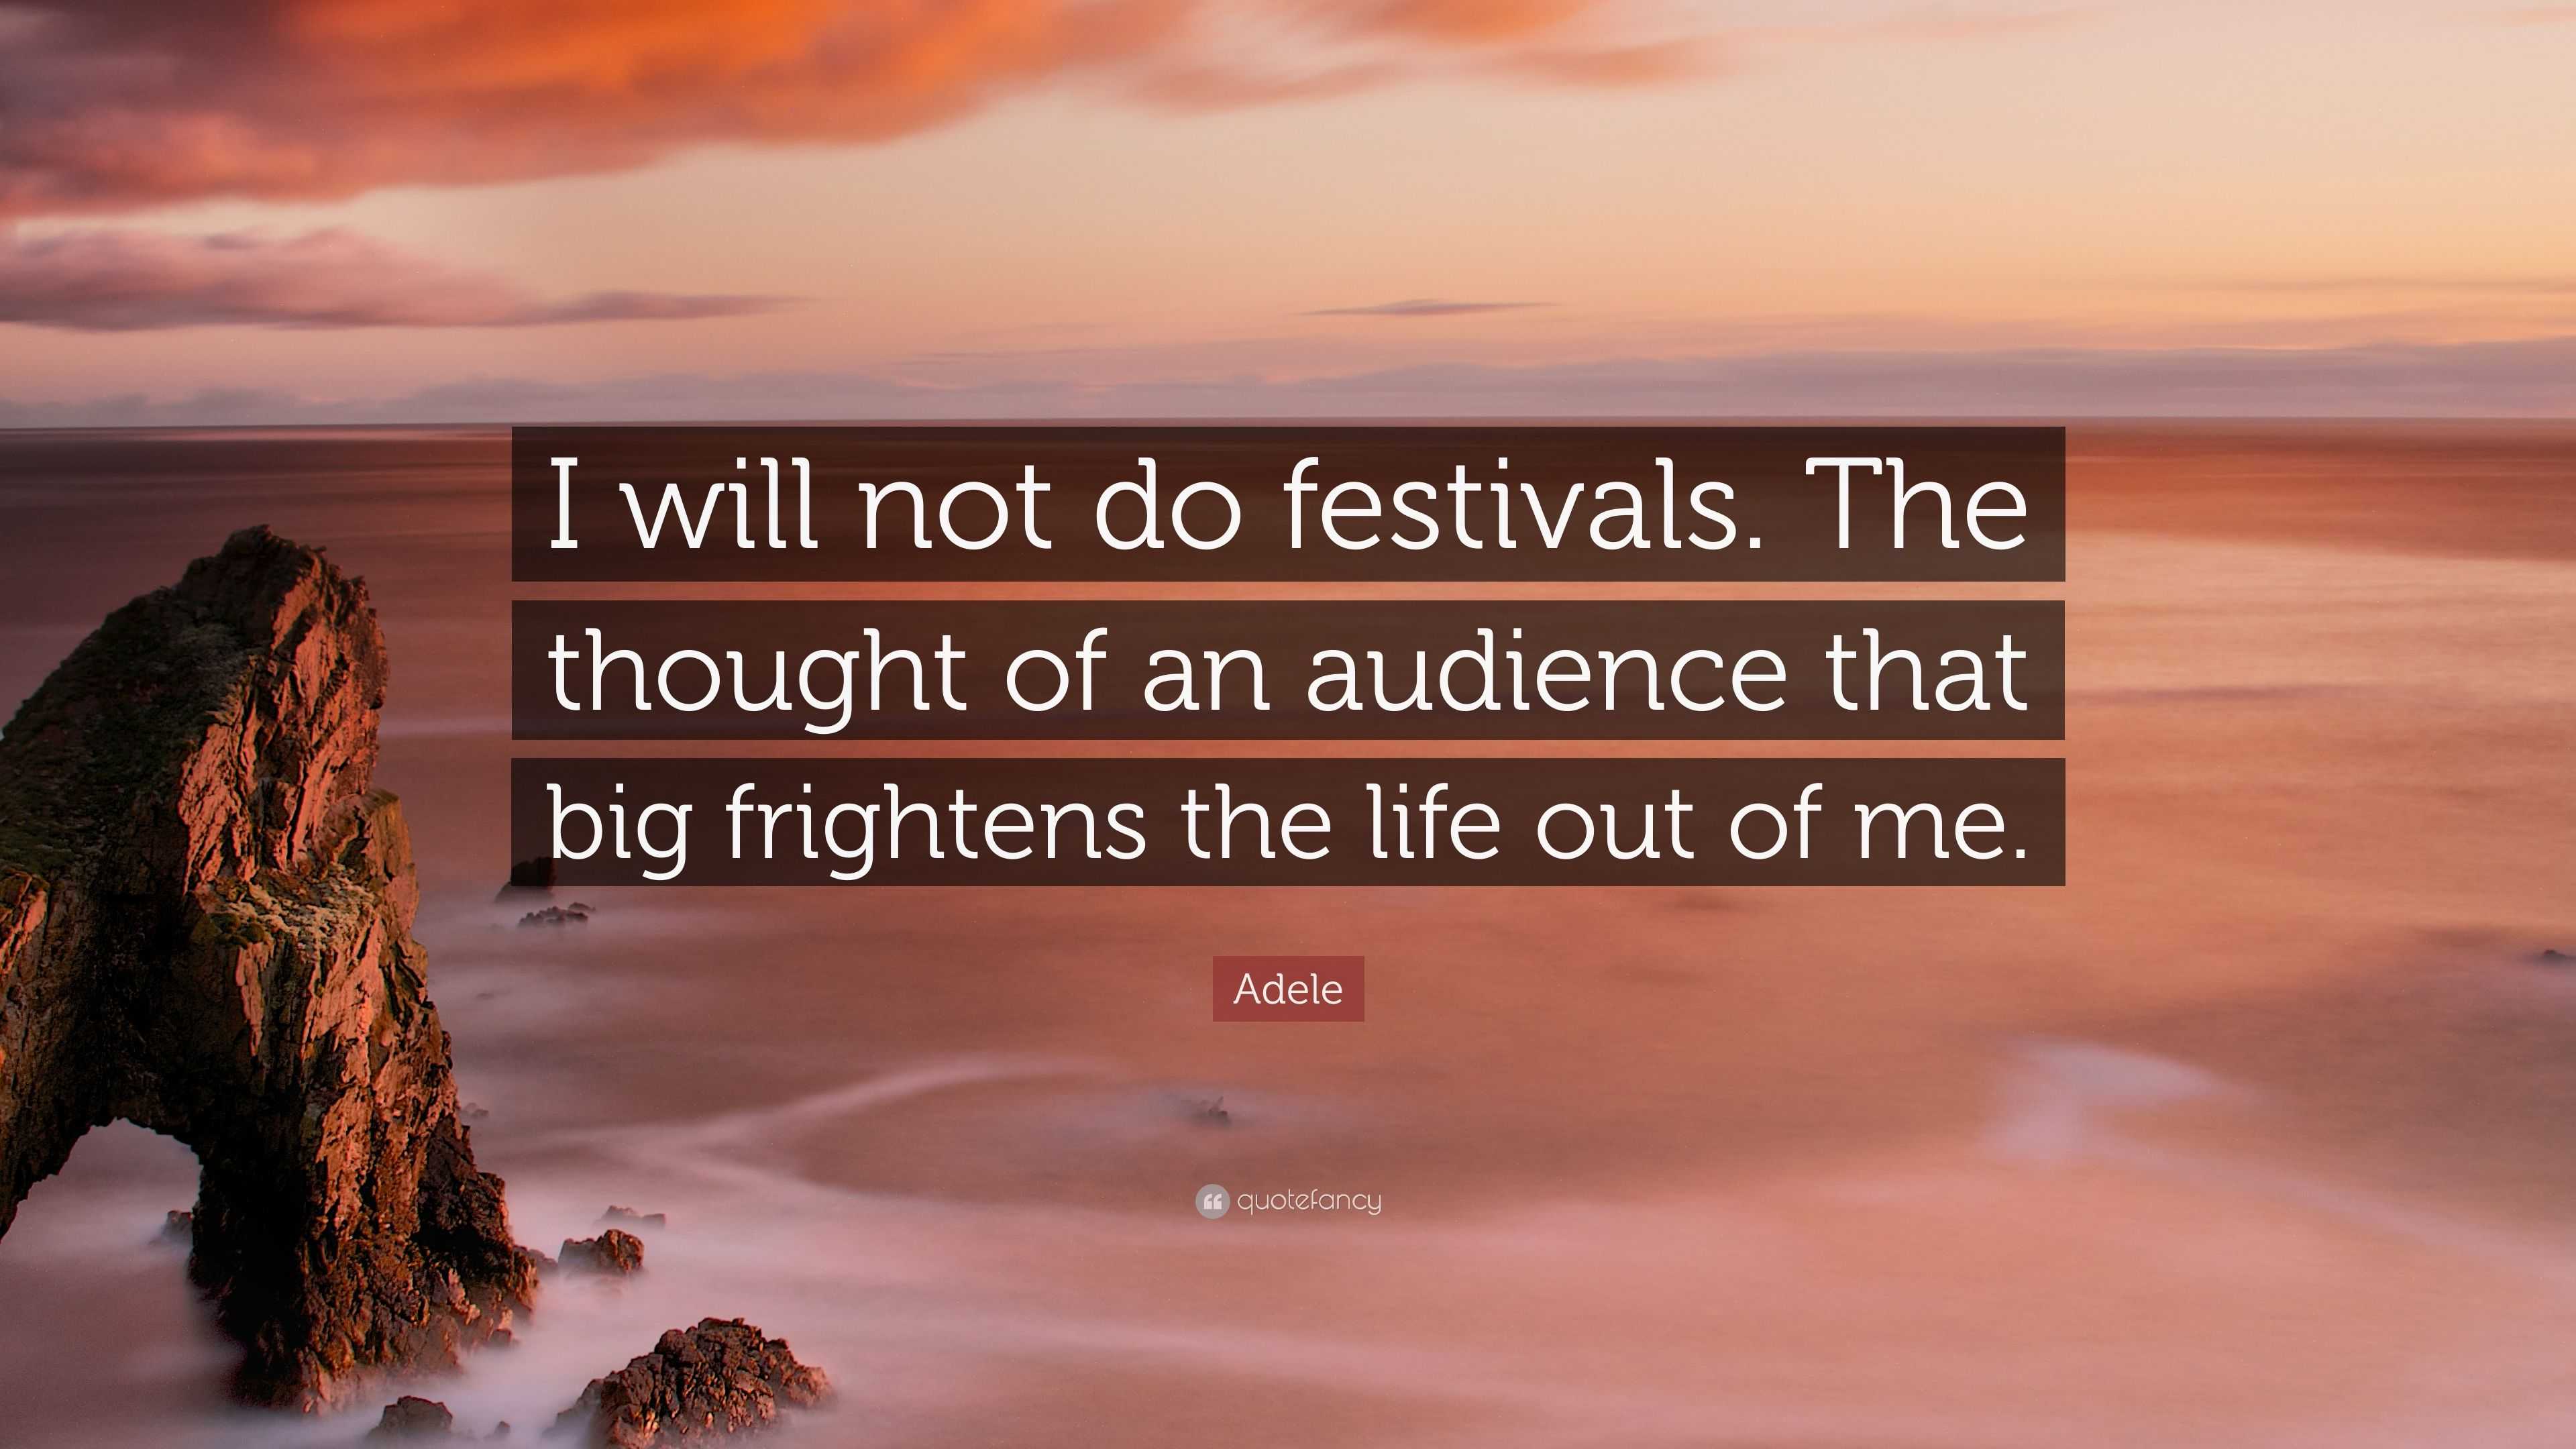 Adele Quote: “I will not do festivals. The thought of an audience that ...